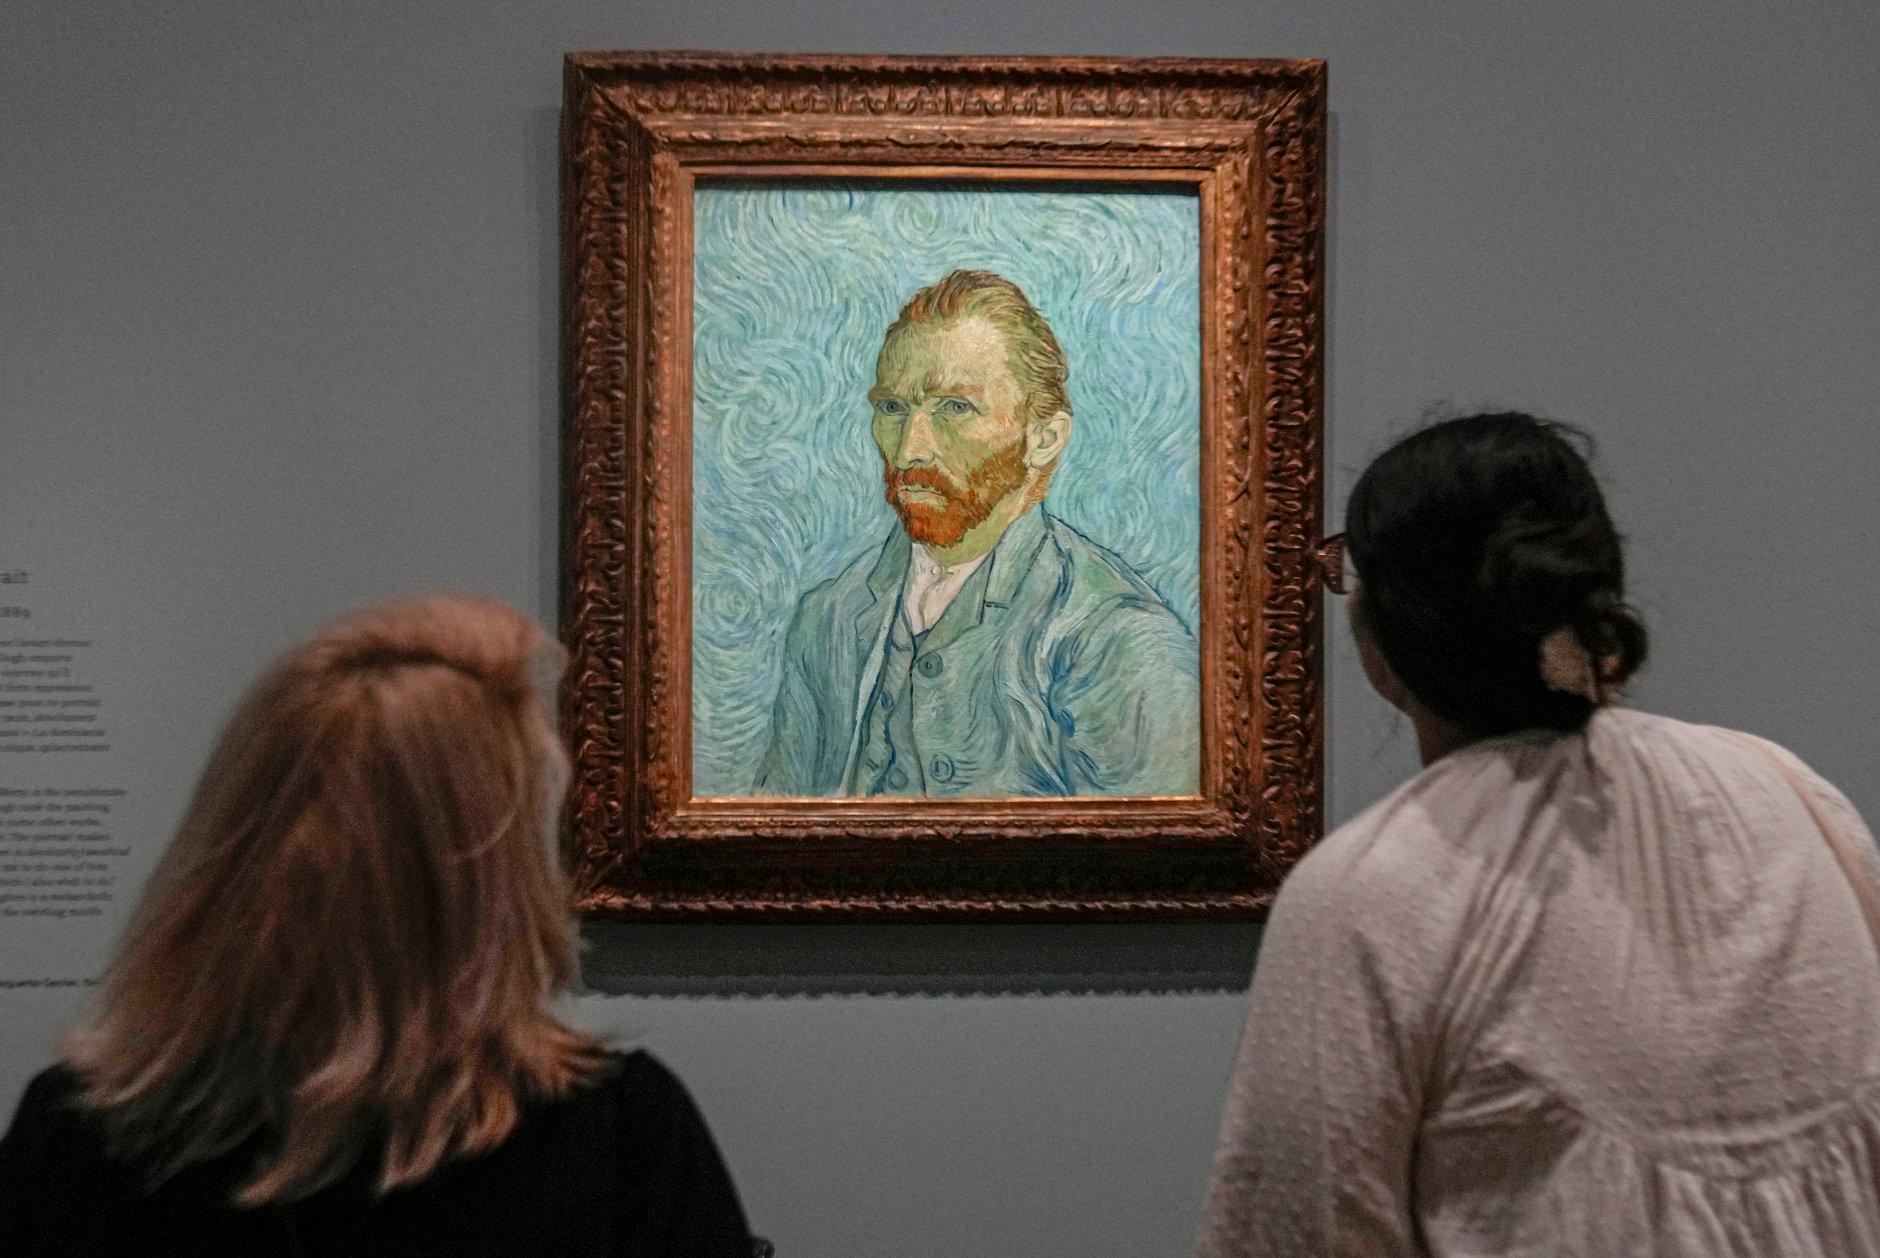 Van Gogh, searching for God's colors